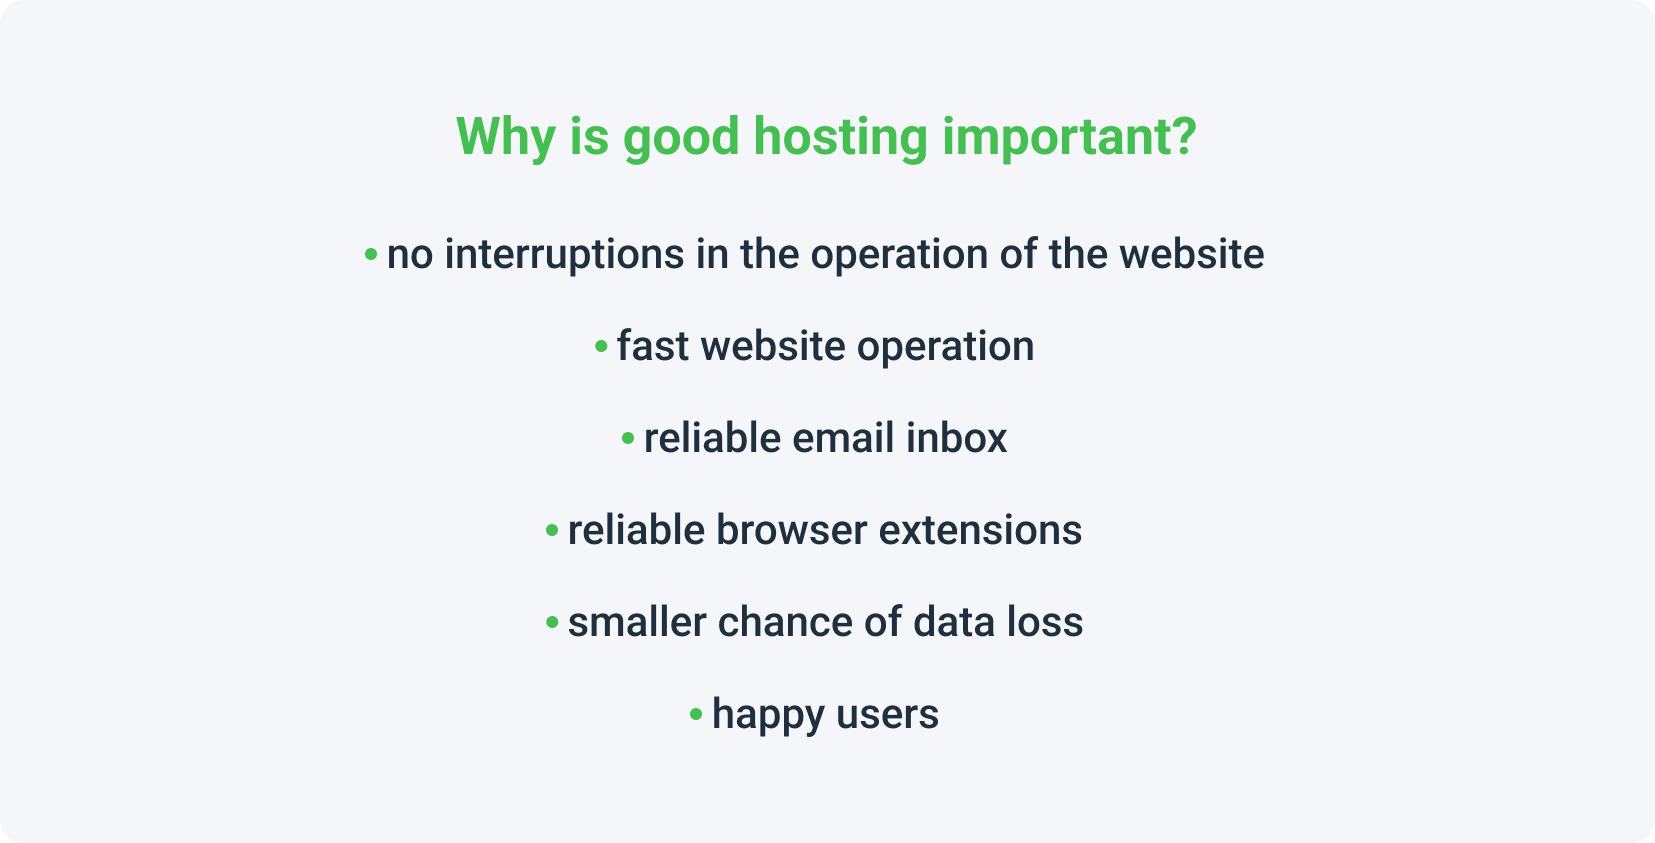 Why is good hosting for a landing page important?